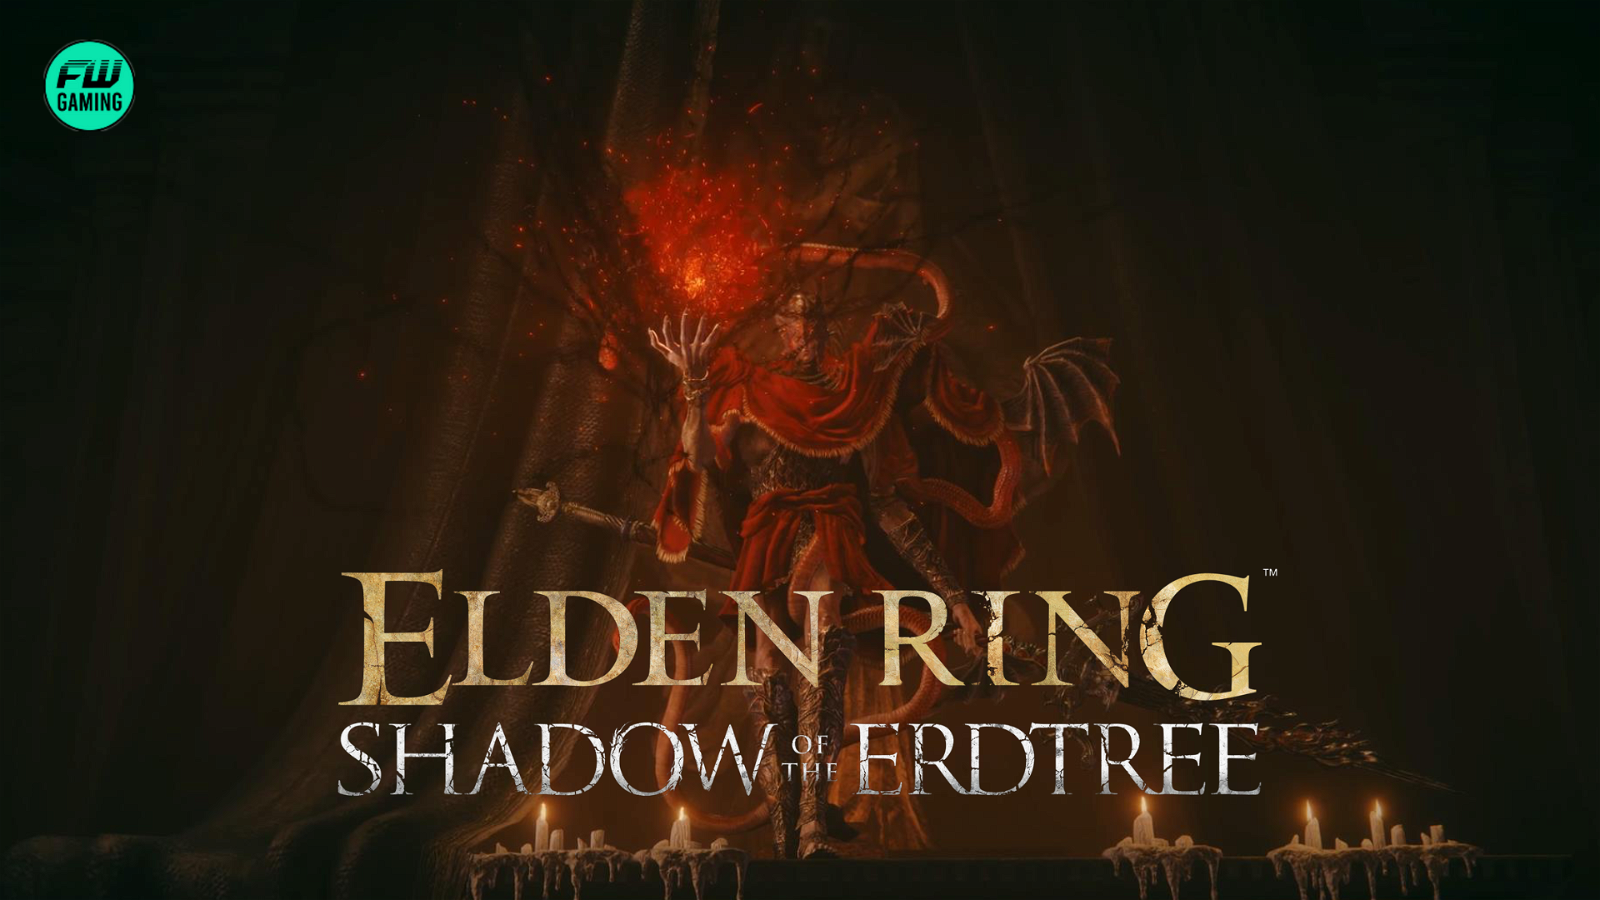 Have We Already Fought Elden Ring DLC Shadow of the Erdtree’s Messmer Before?